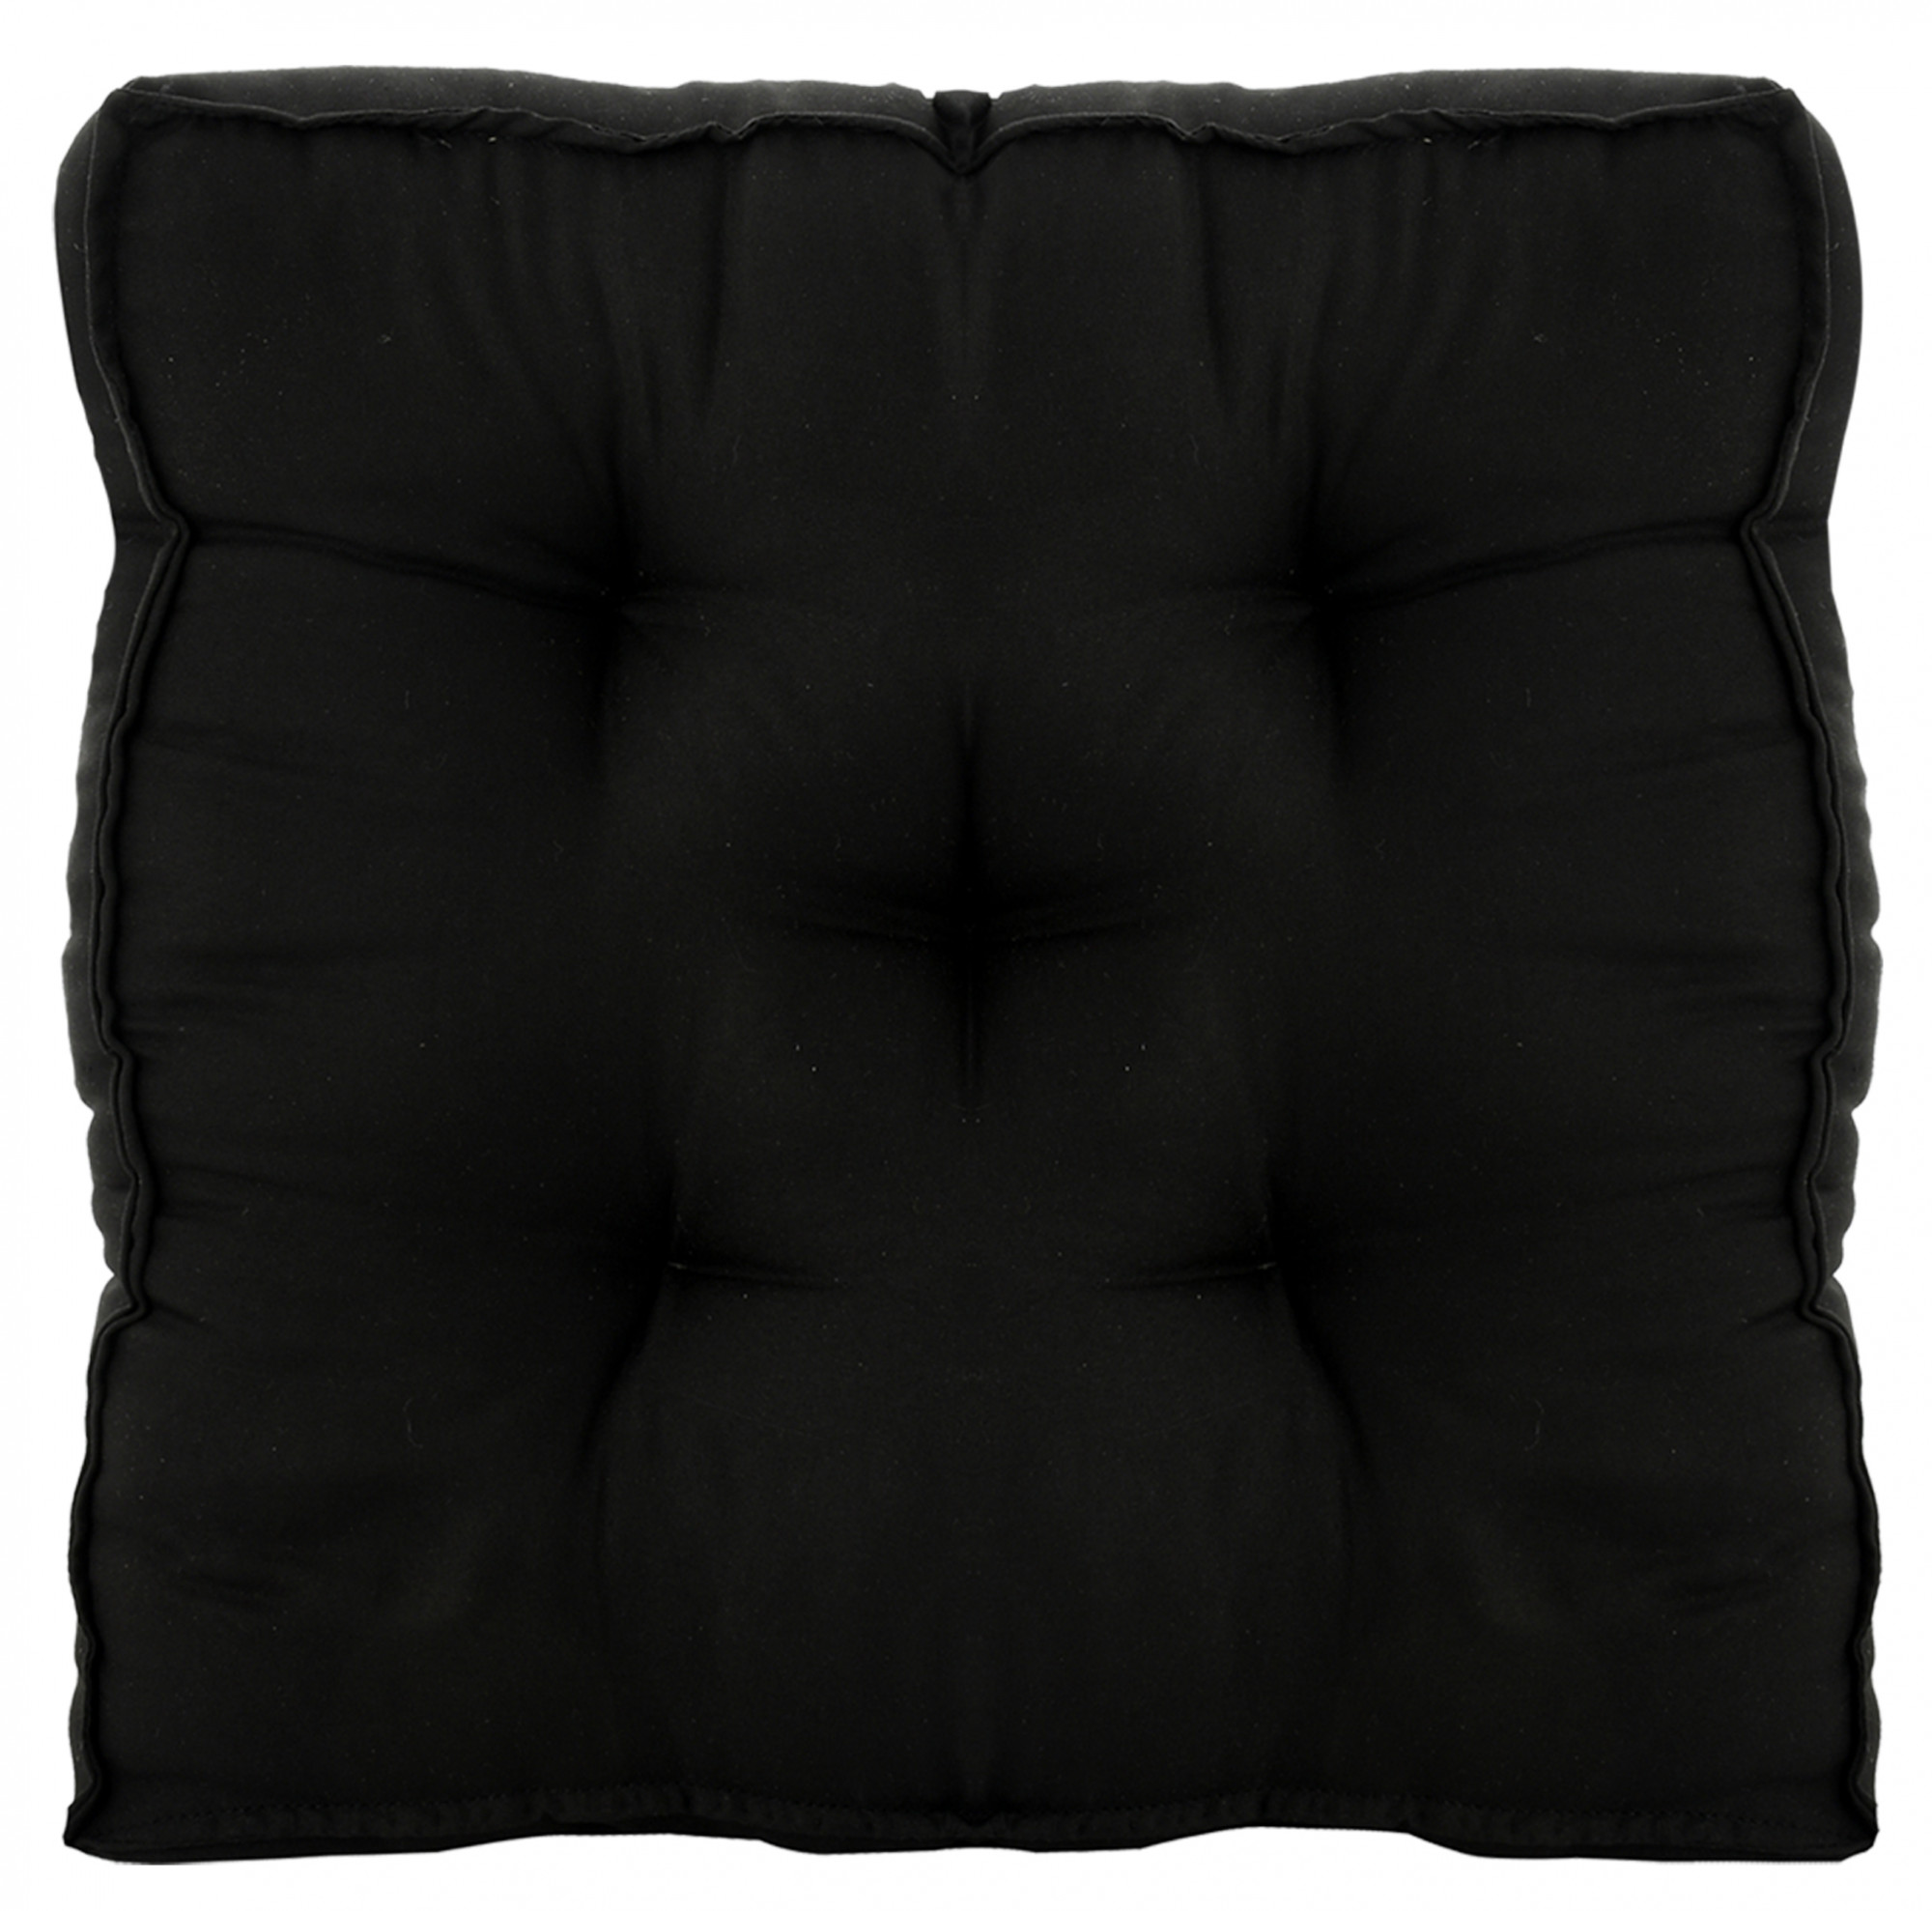 Kuber Industries Microfiber 18*36 Inch Back And Seat Chair Cushion With Ties & 18*18 Inch Square Cushion for Rocking Chair, Desk chair, Dining chairs, Lounge chair- Set of 2 (Black)